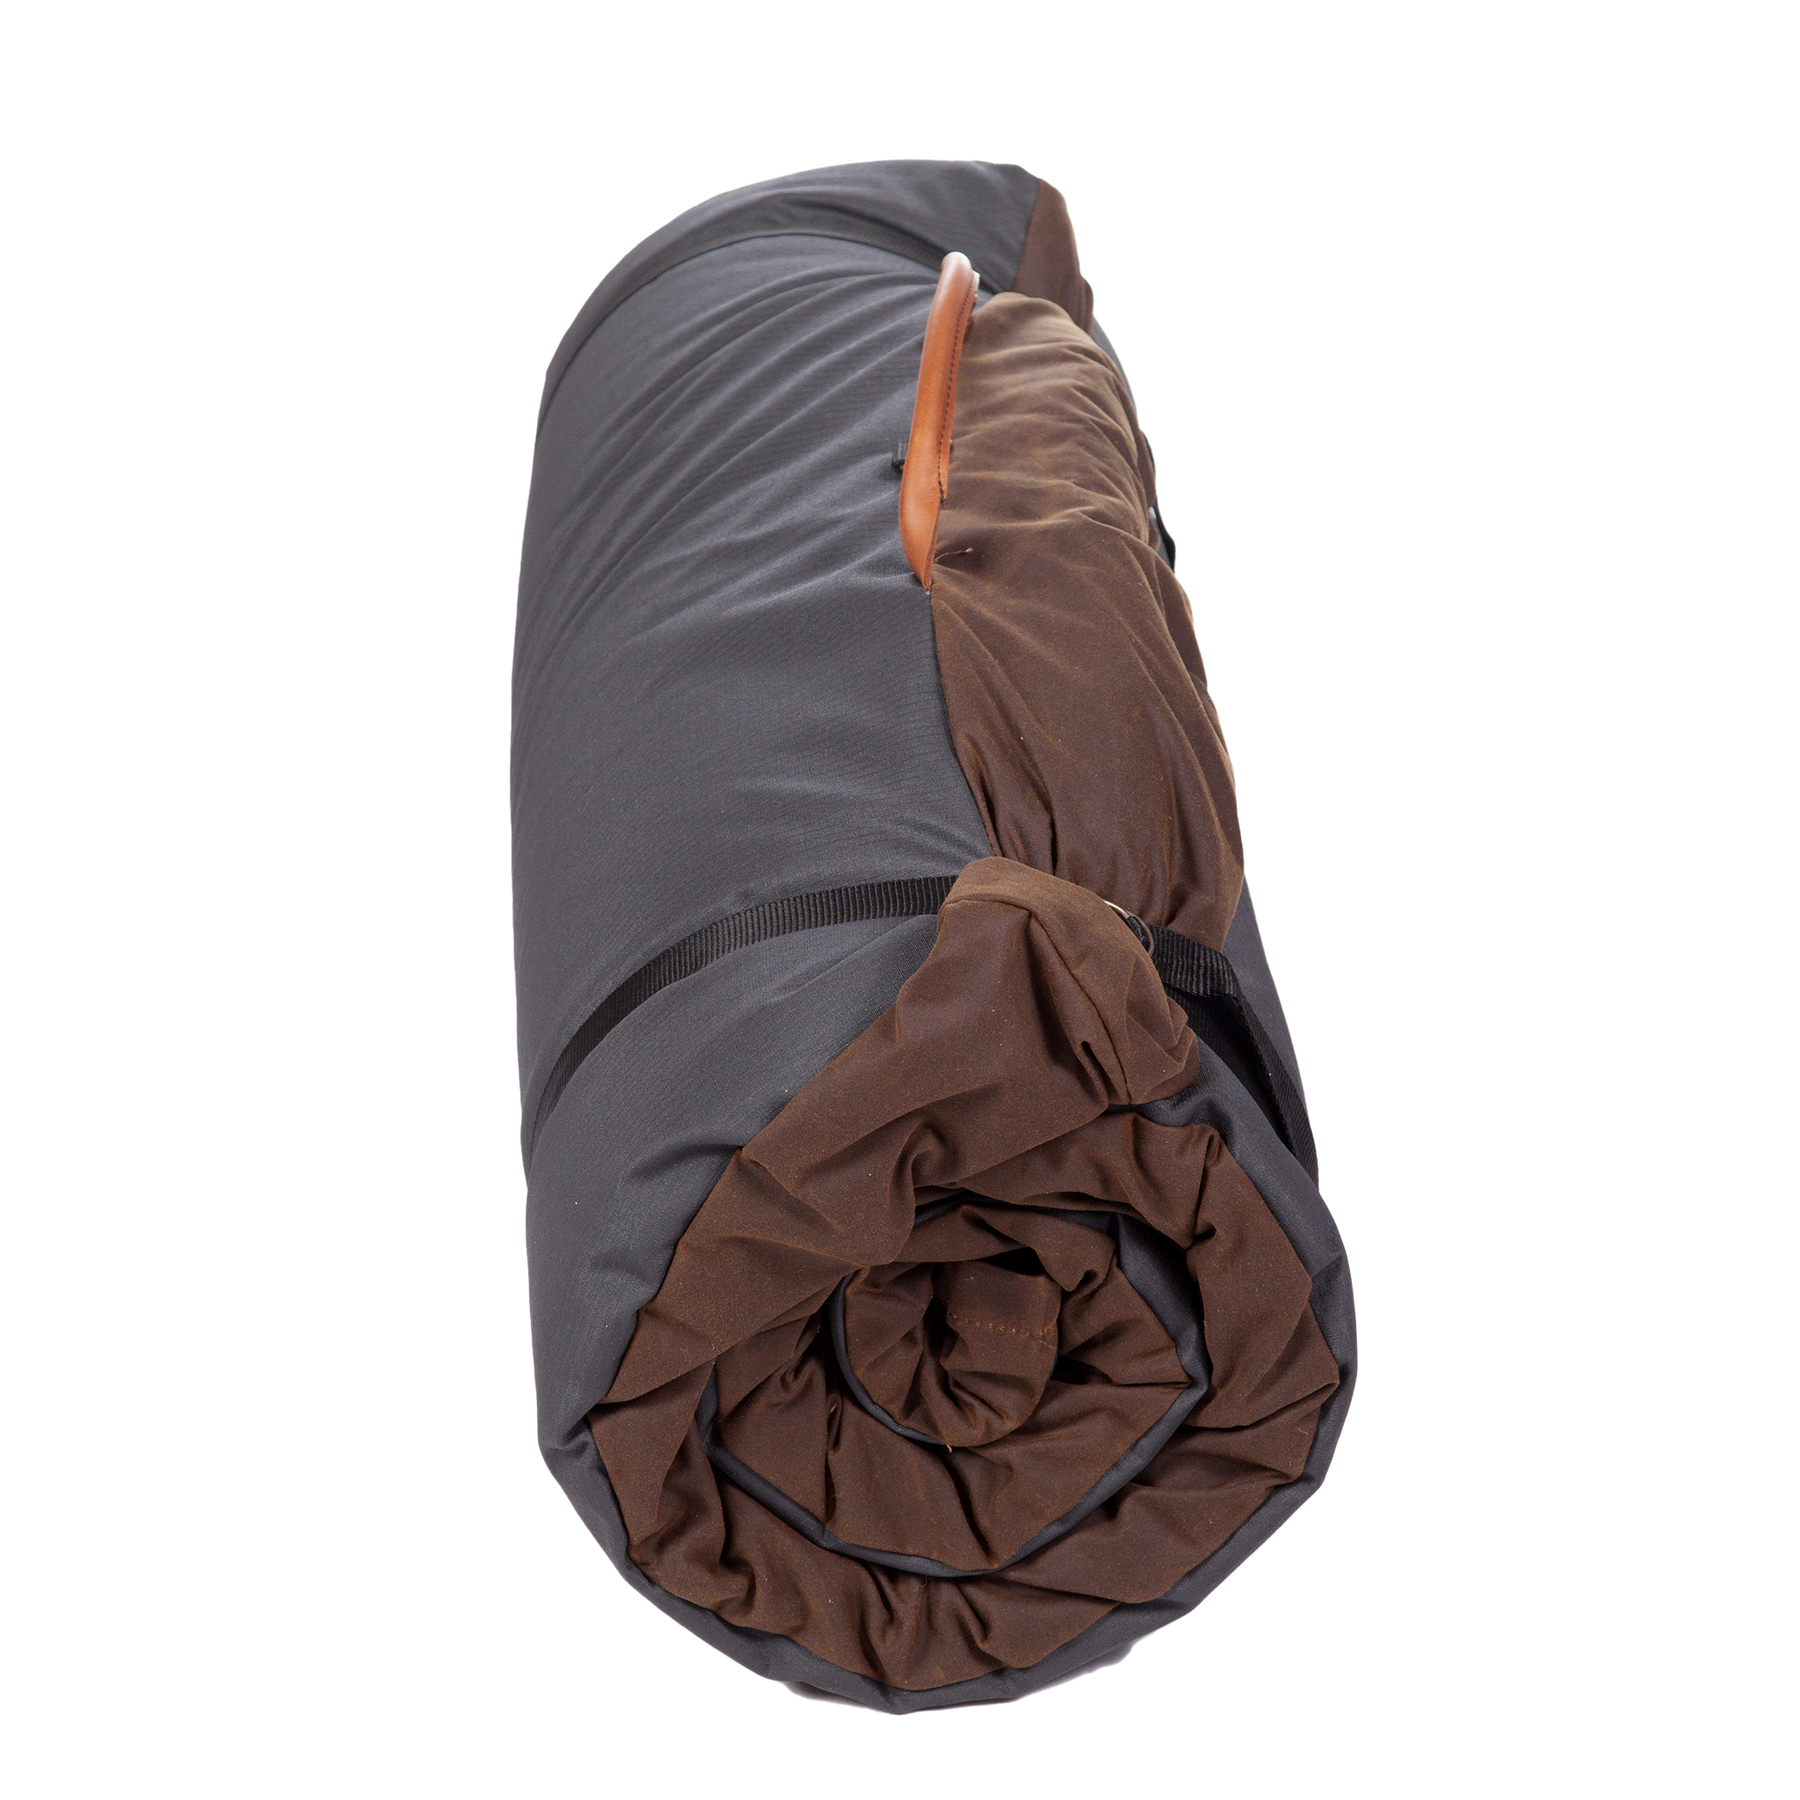 Bedroll (with Covered Mattress & Sand Canvas Bag)   Melvill & Moon USA- Overland Kitted